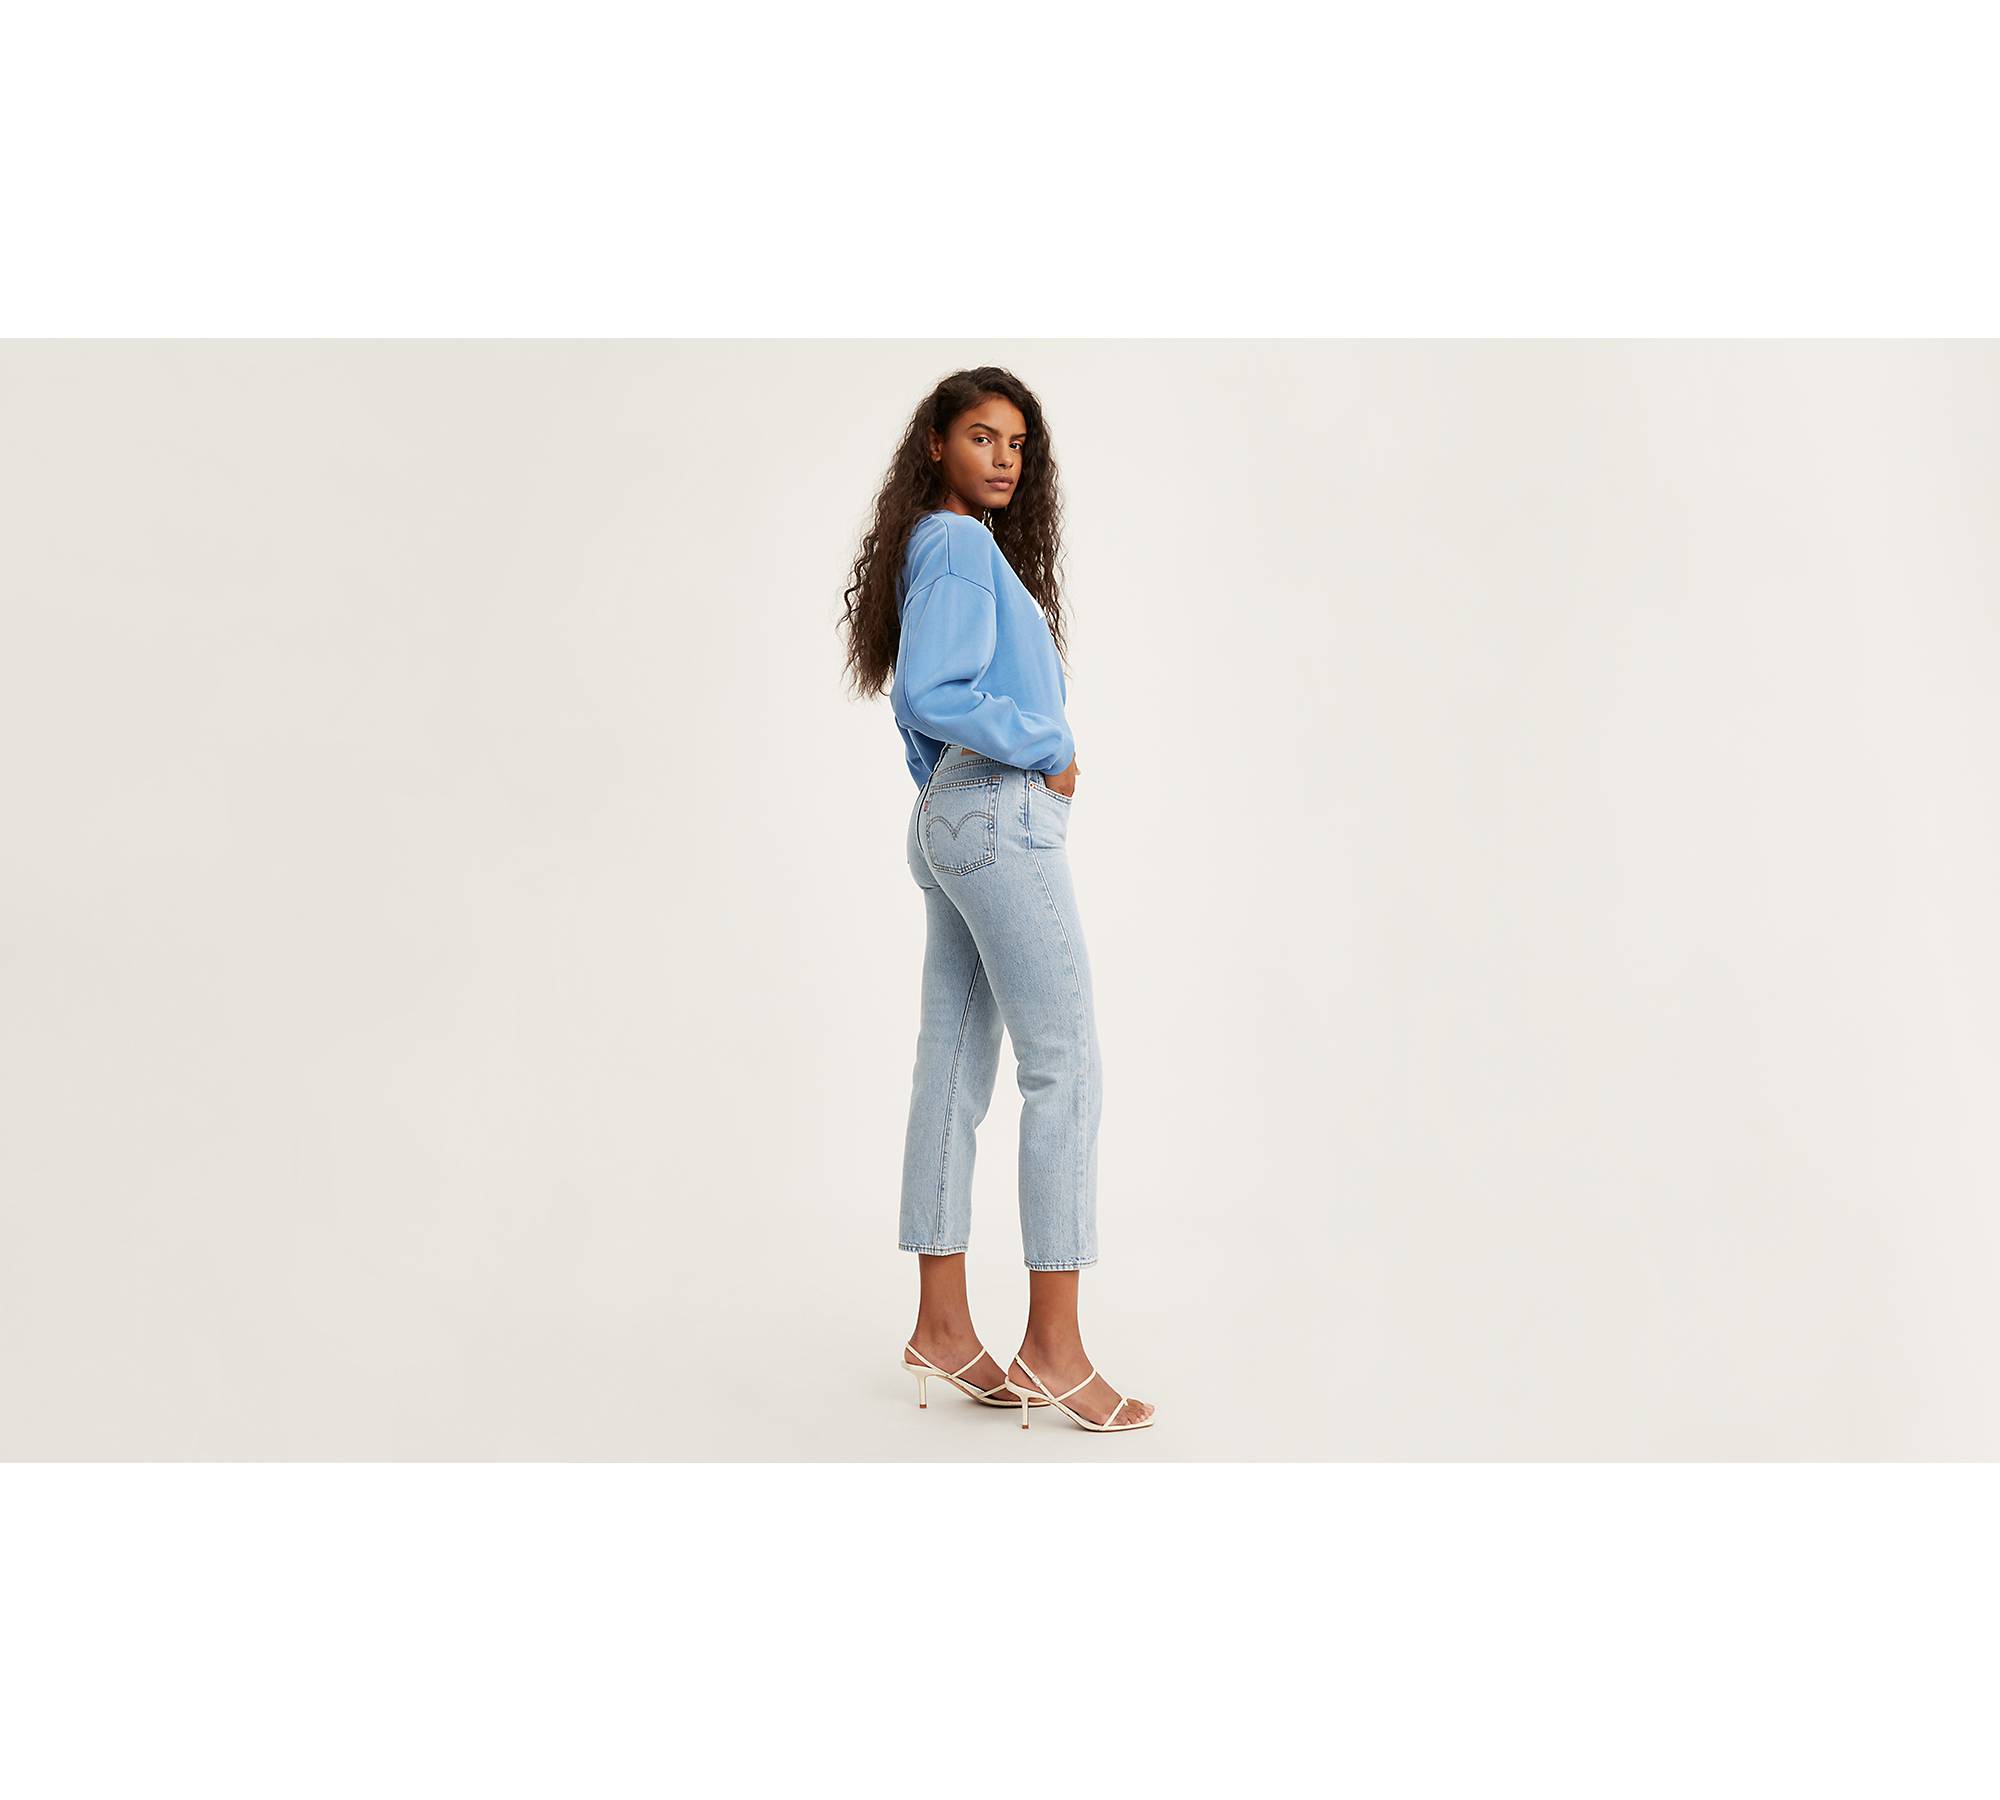 Wedgie Straight Fit Women's Jeans - Light Wash | Levi's® CA